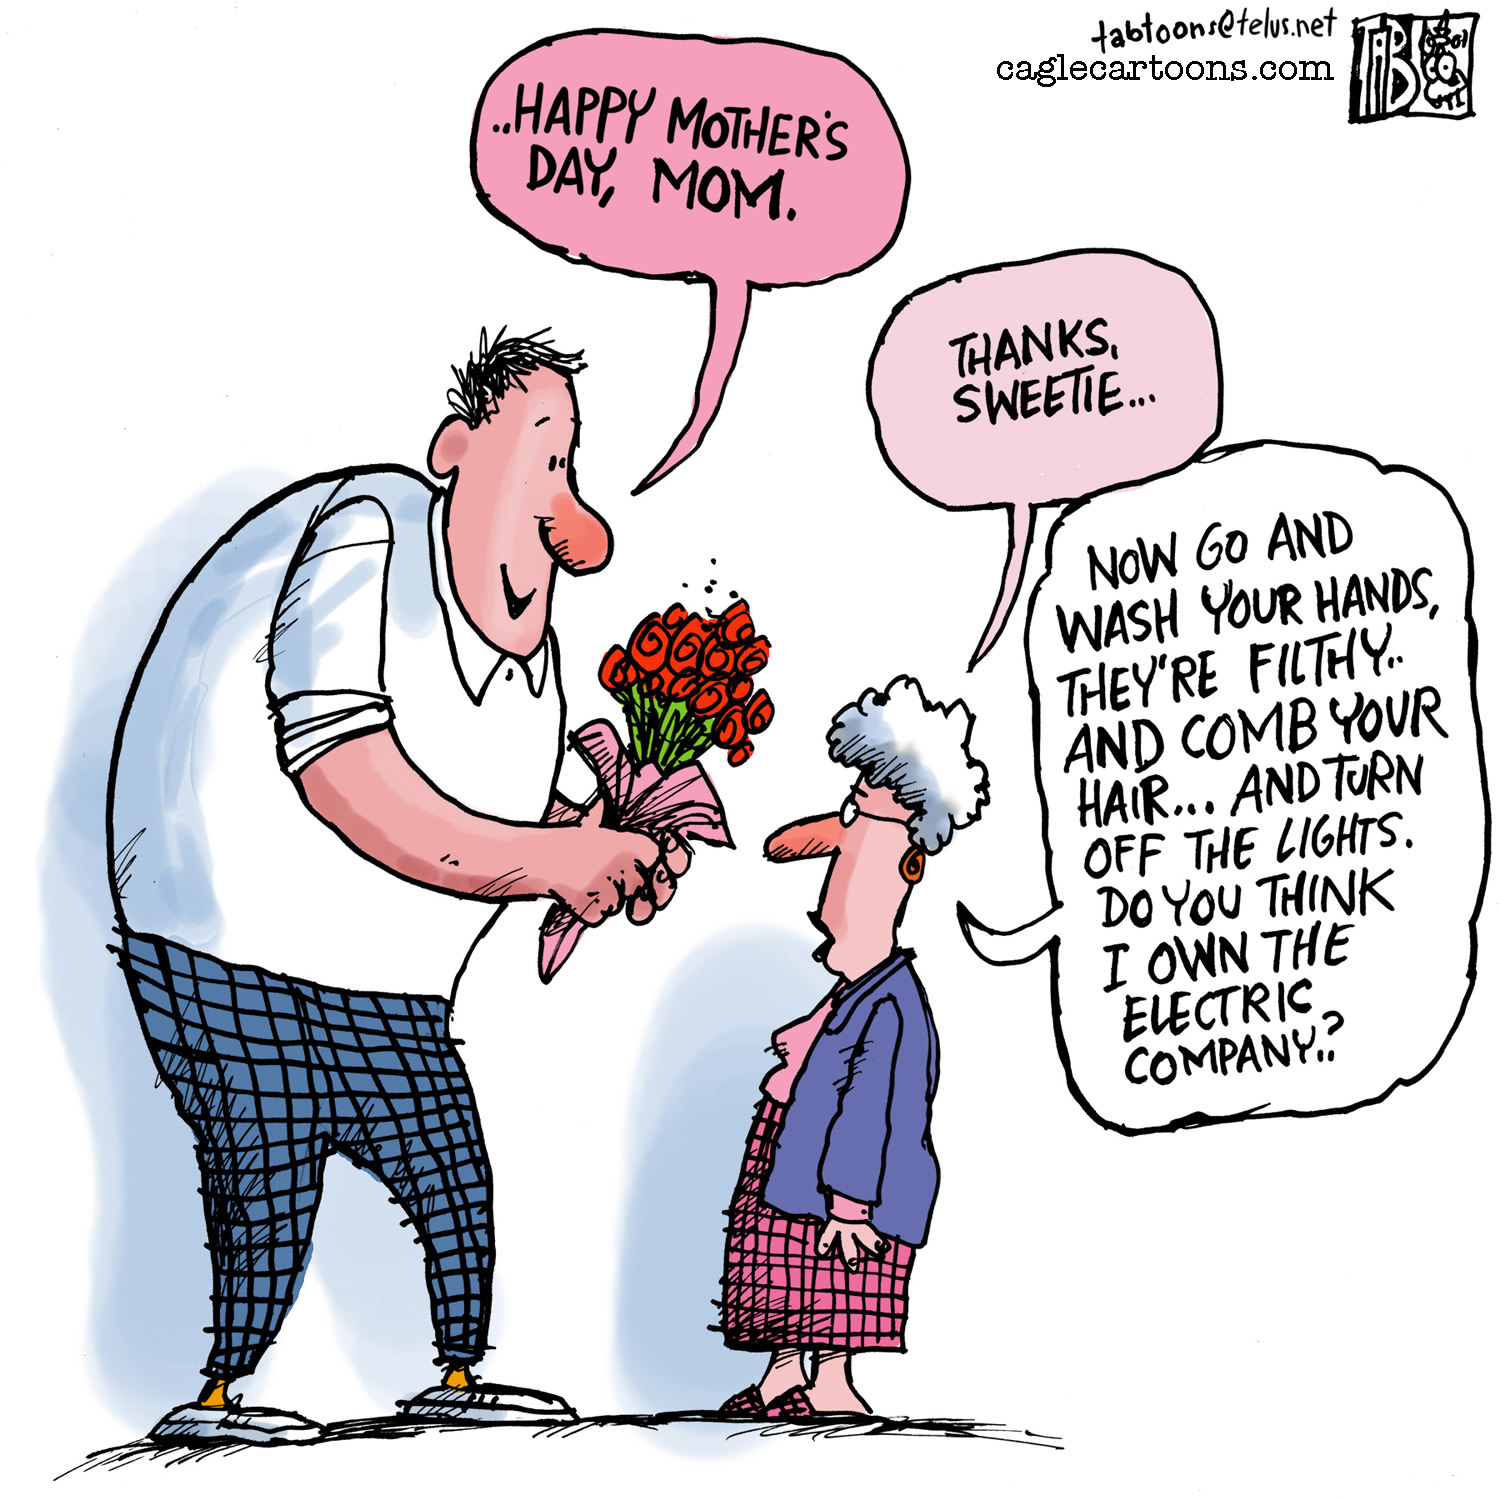 Cartoons: Sweetly mocking Mother's Day